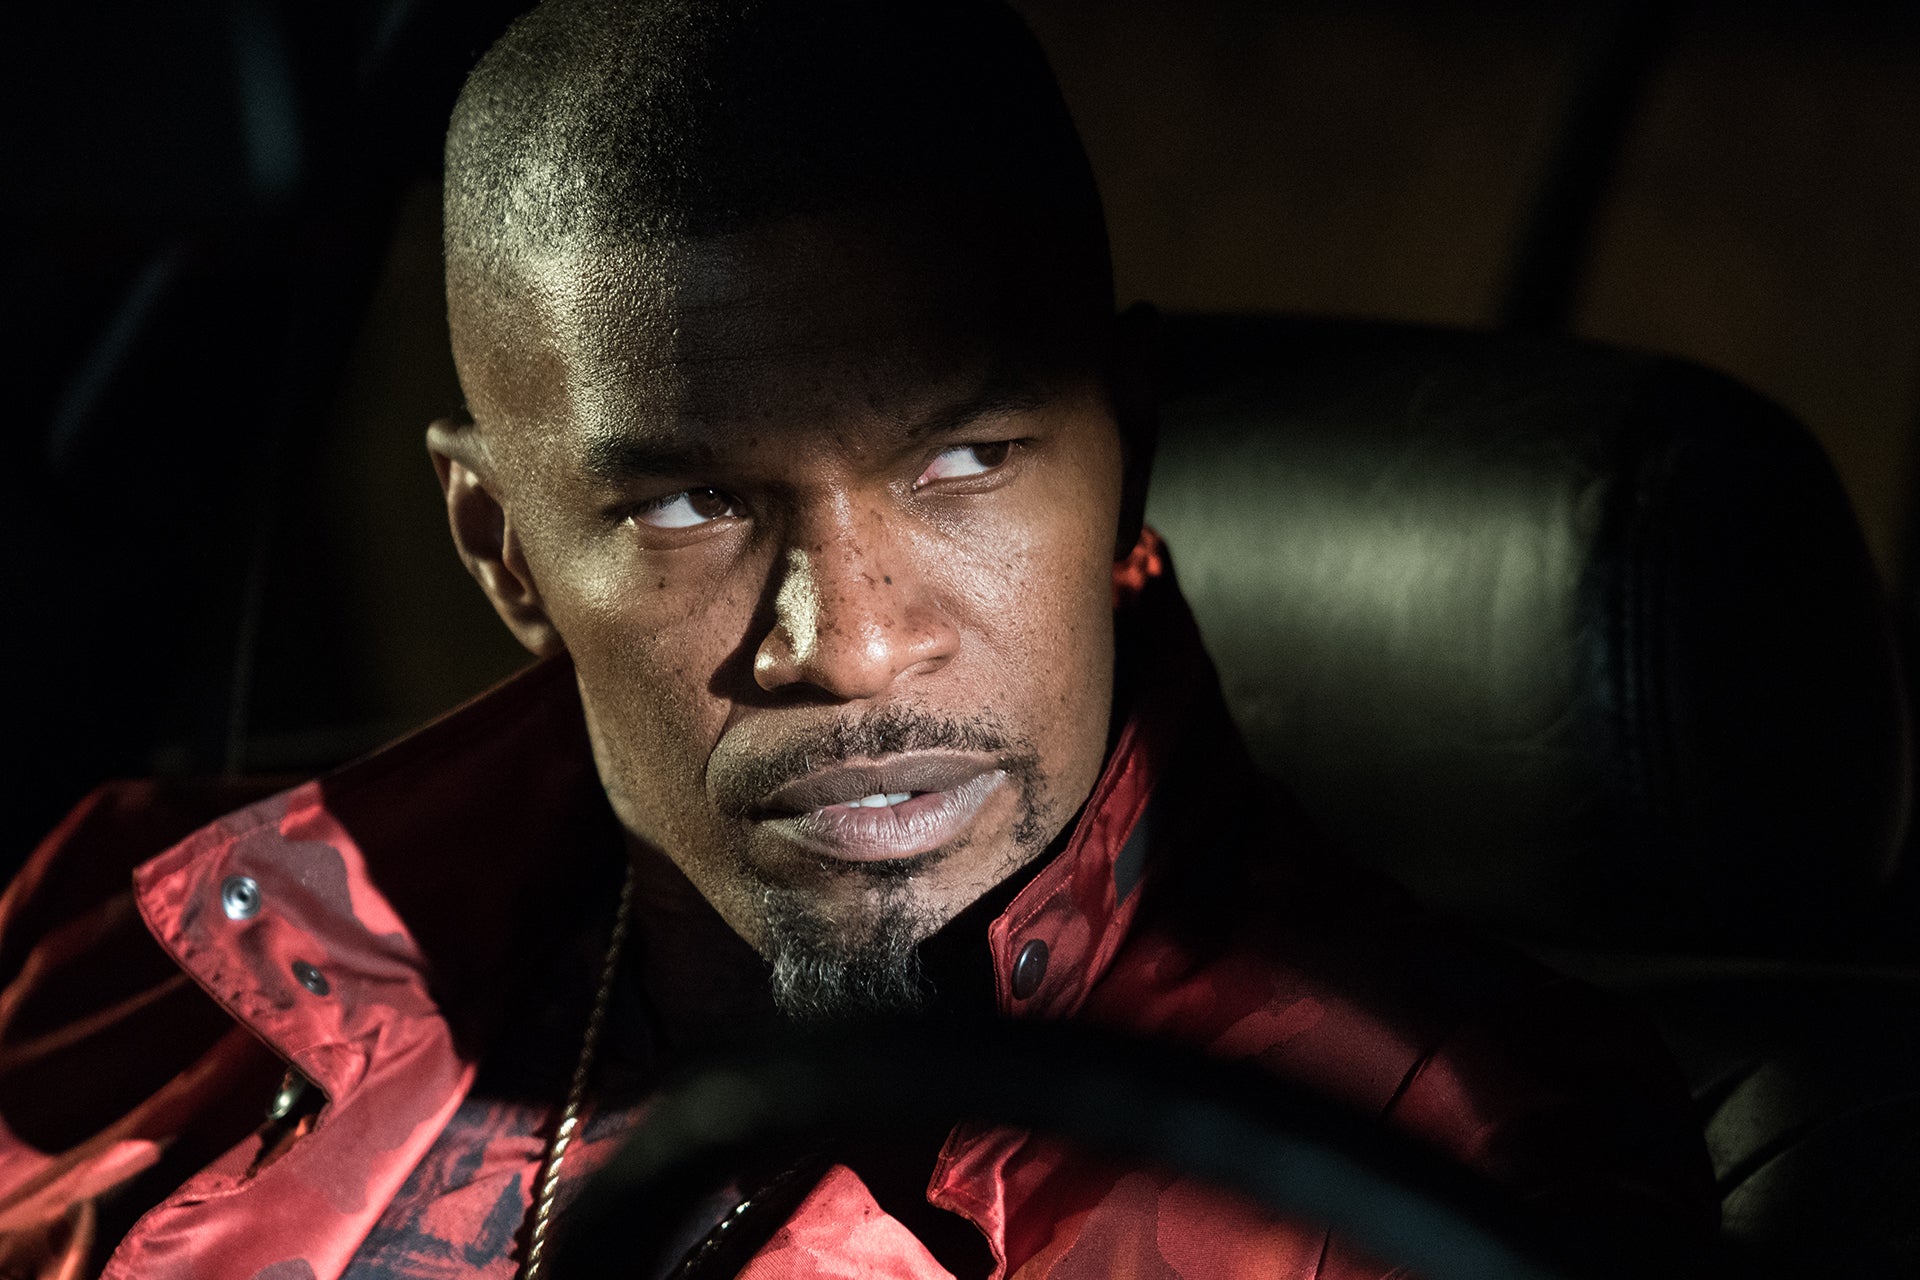 WATCH: Jamie Foxx Is Unstoppable In New Crime-Action Film
